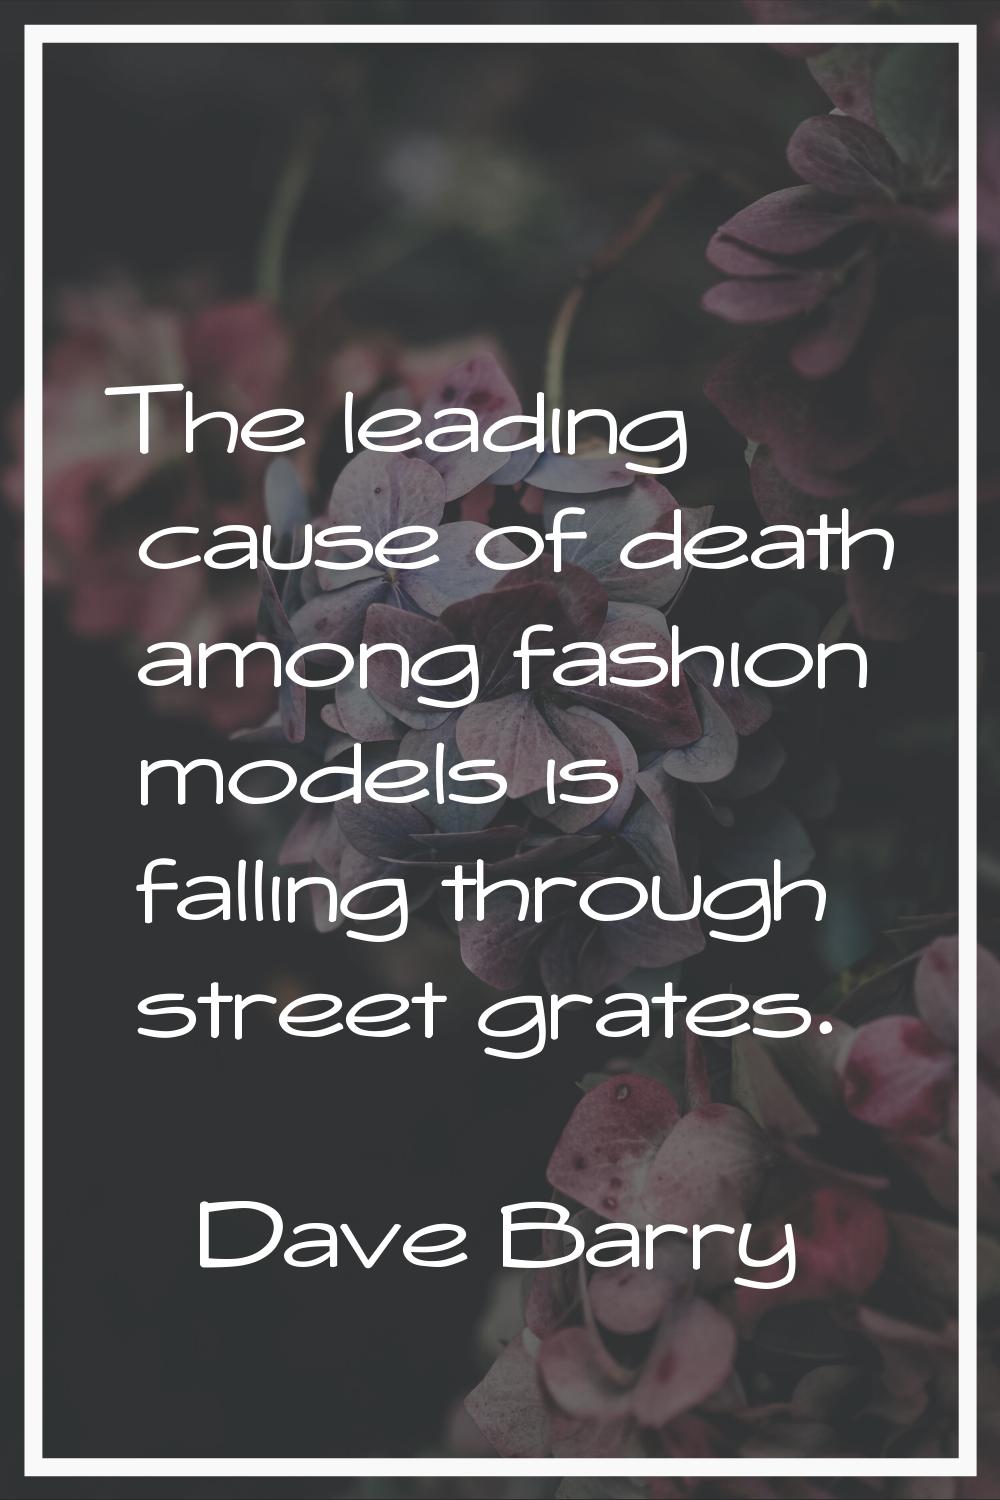 The leading cause of death among fashion models is falling through street grates.